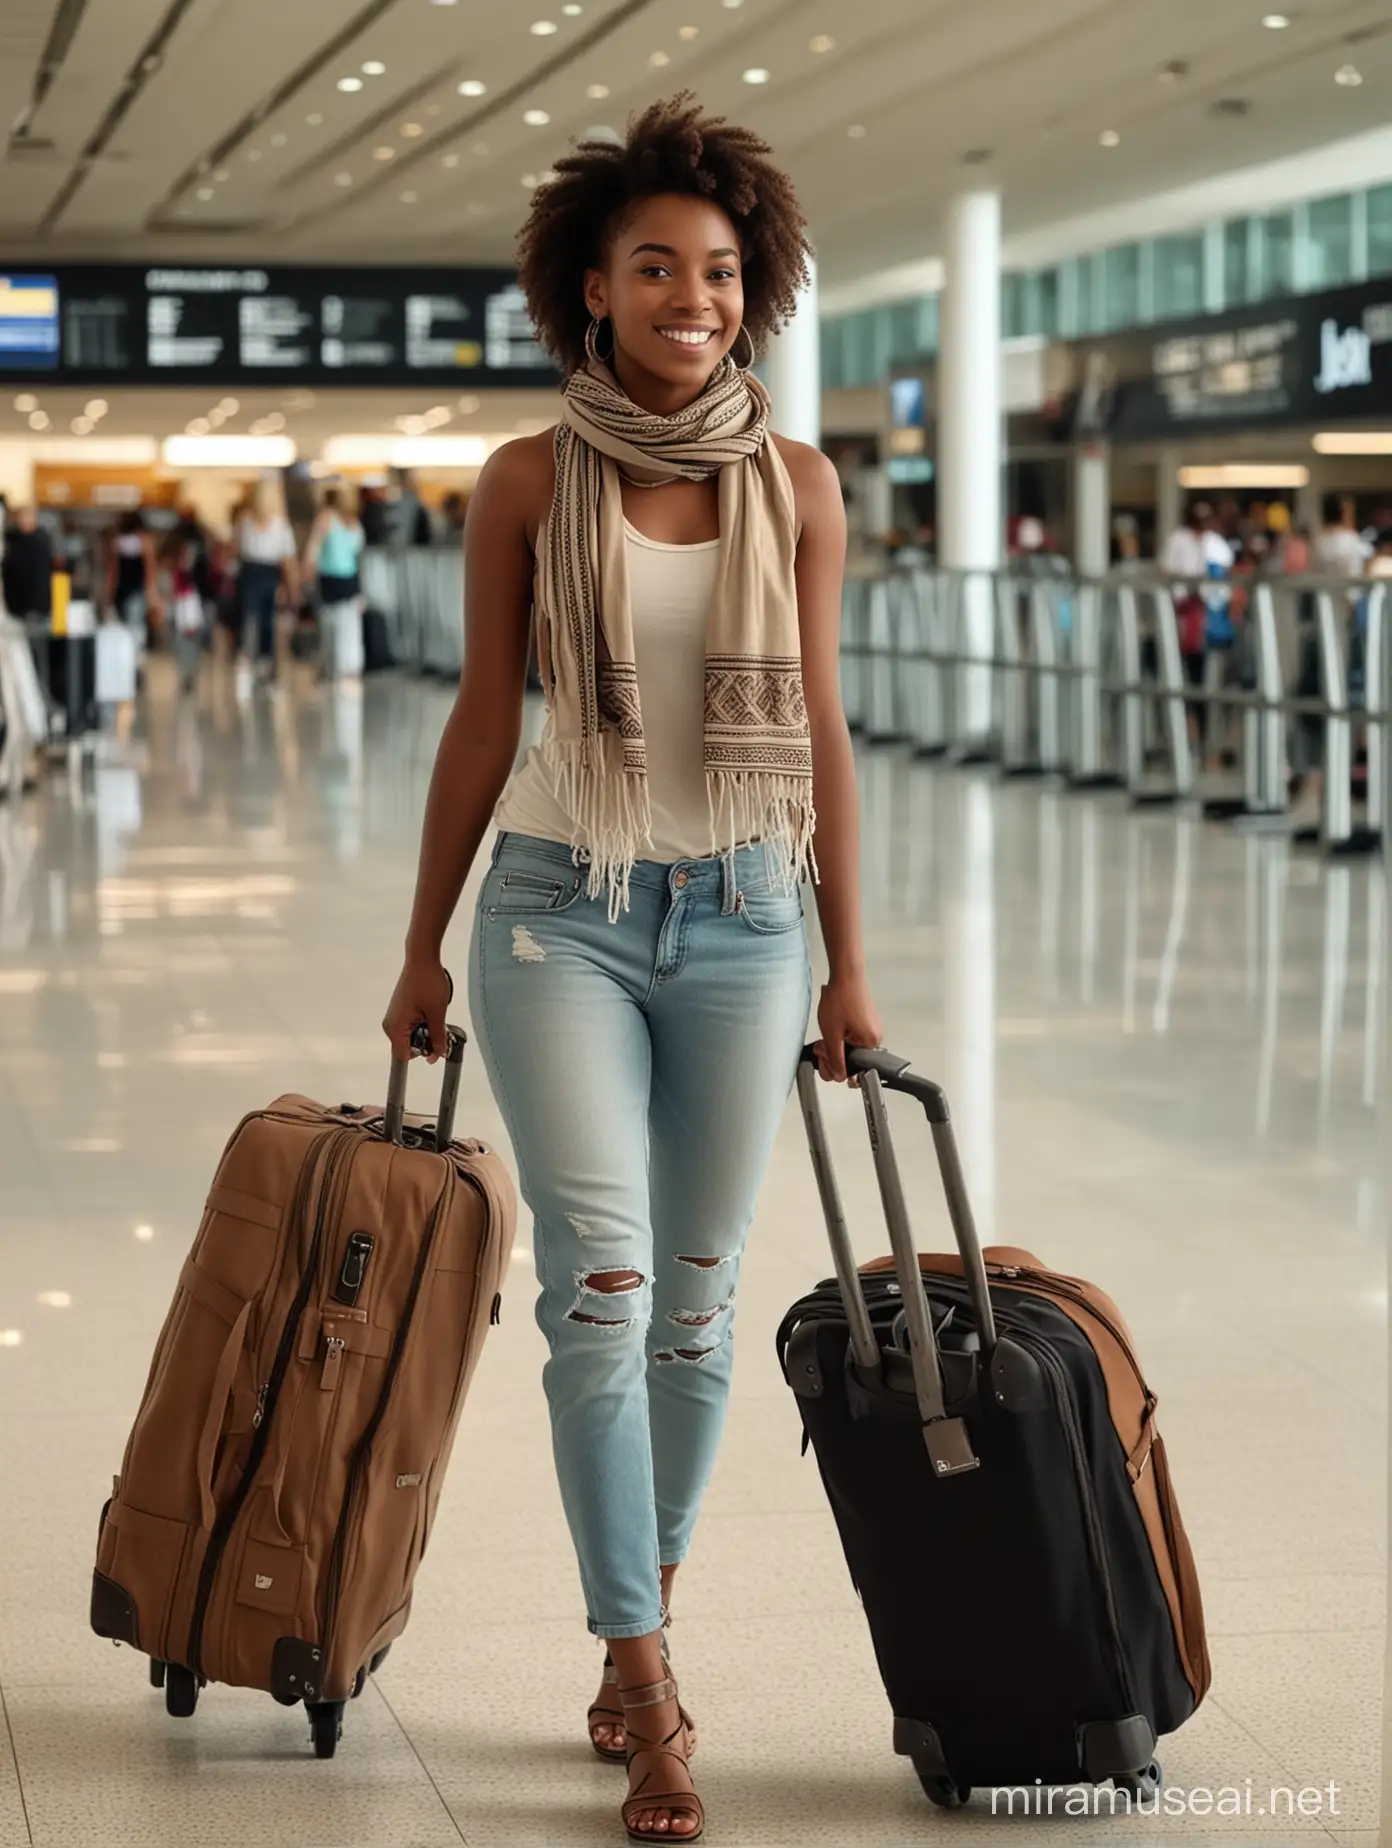 Caribbean Woman in Sportswear and Elegant Scarf Walking Through Airport with Luggage